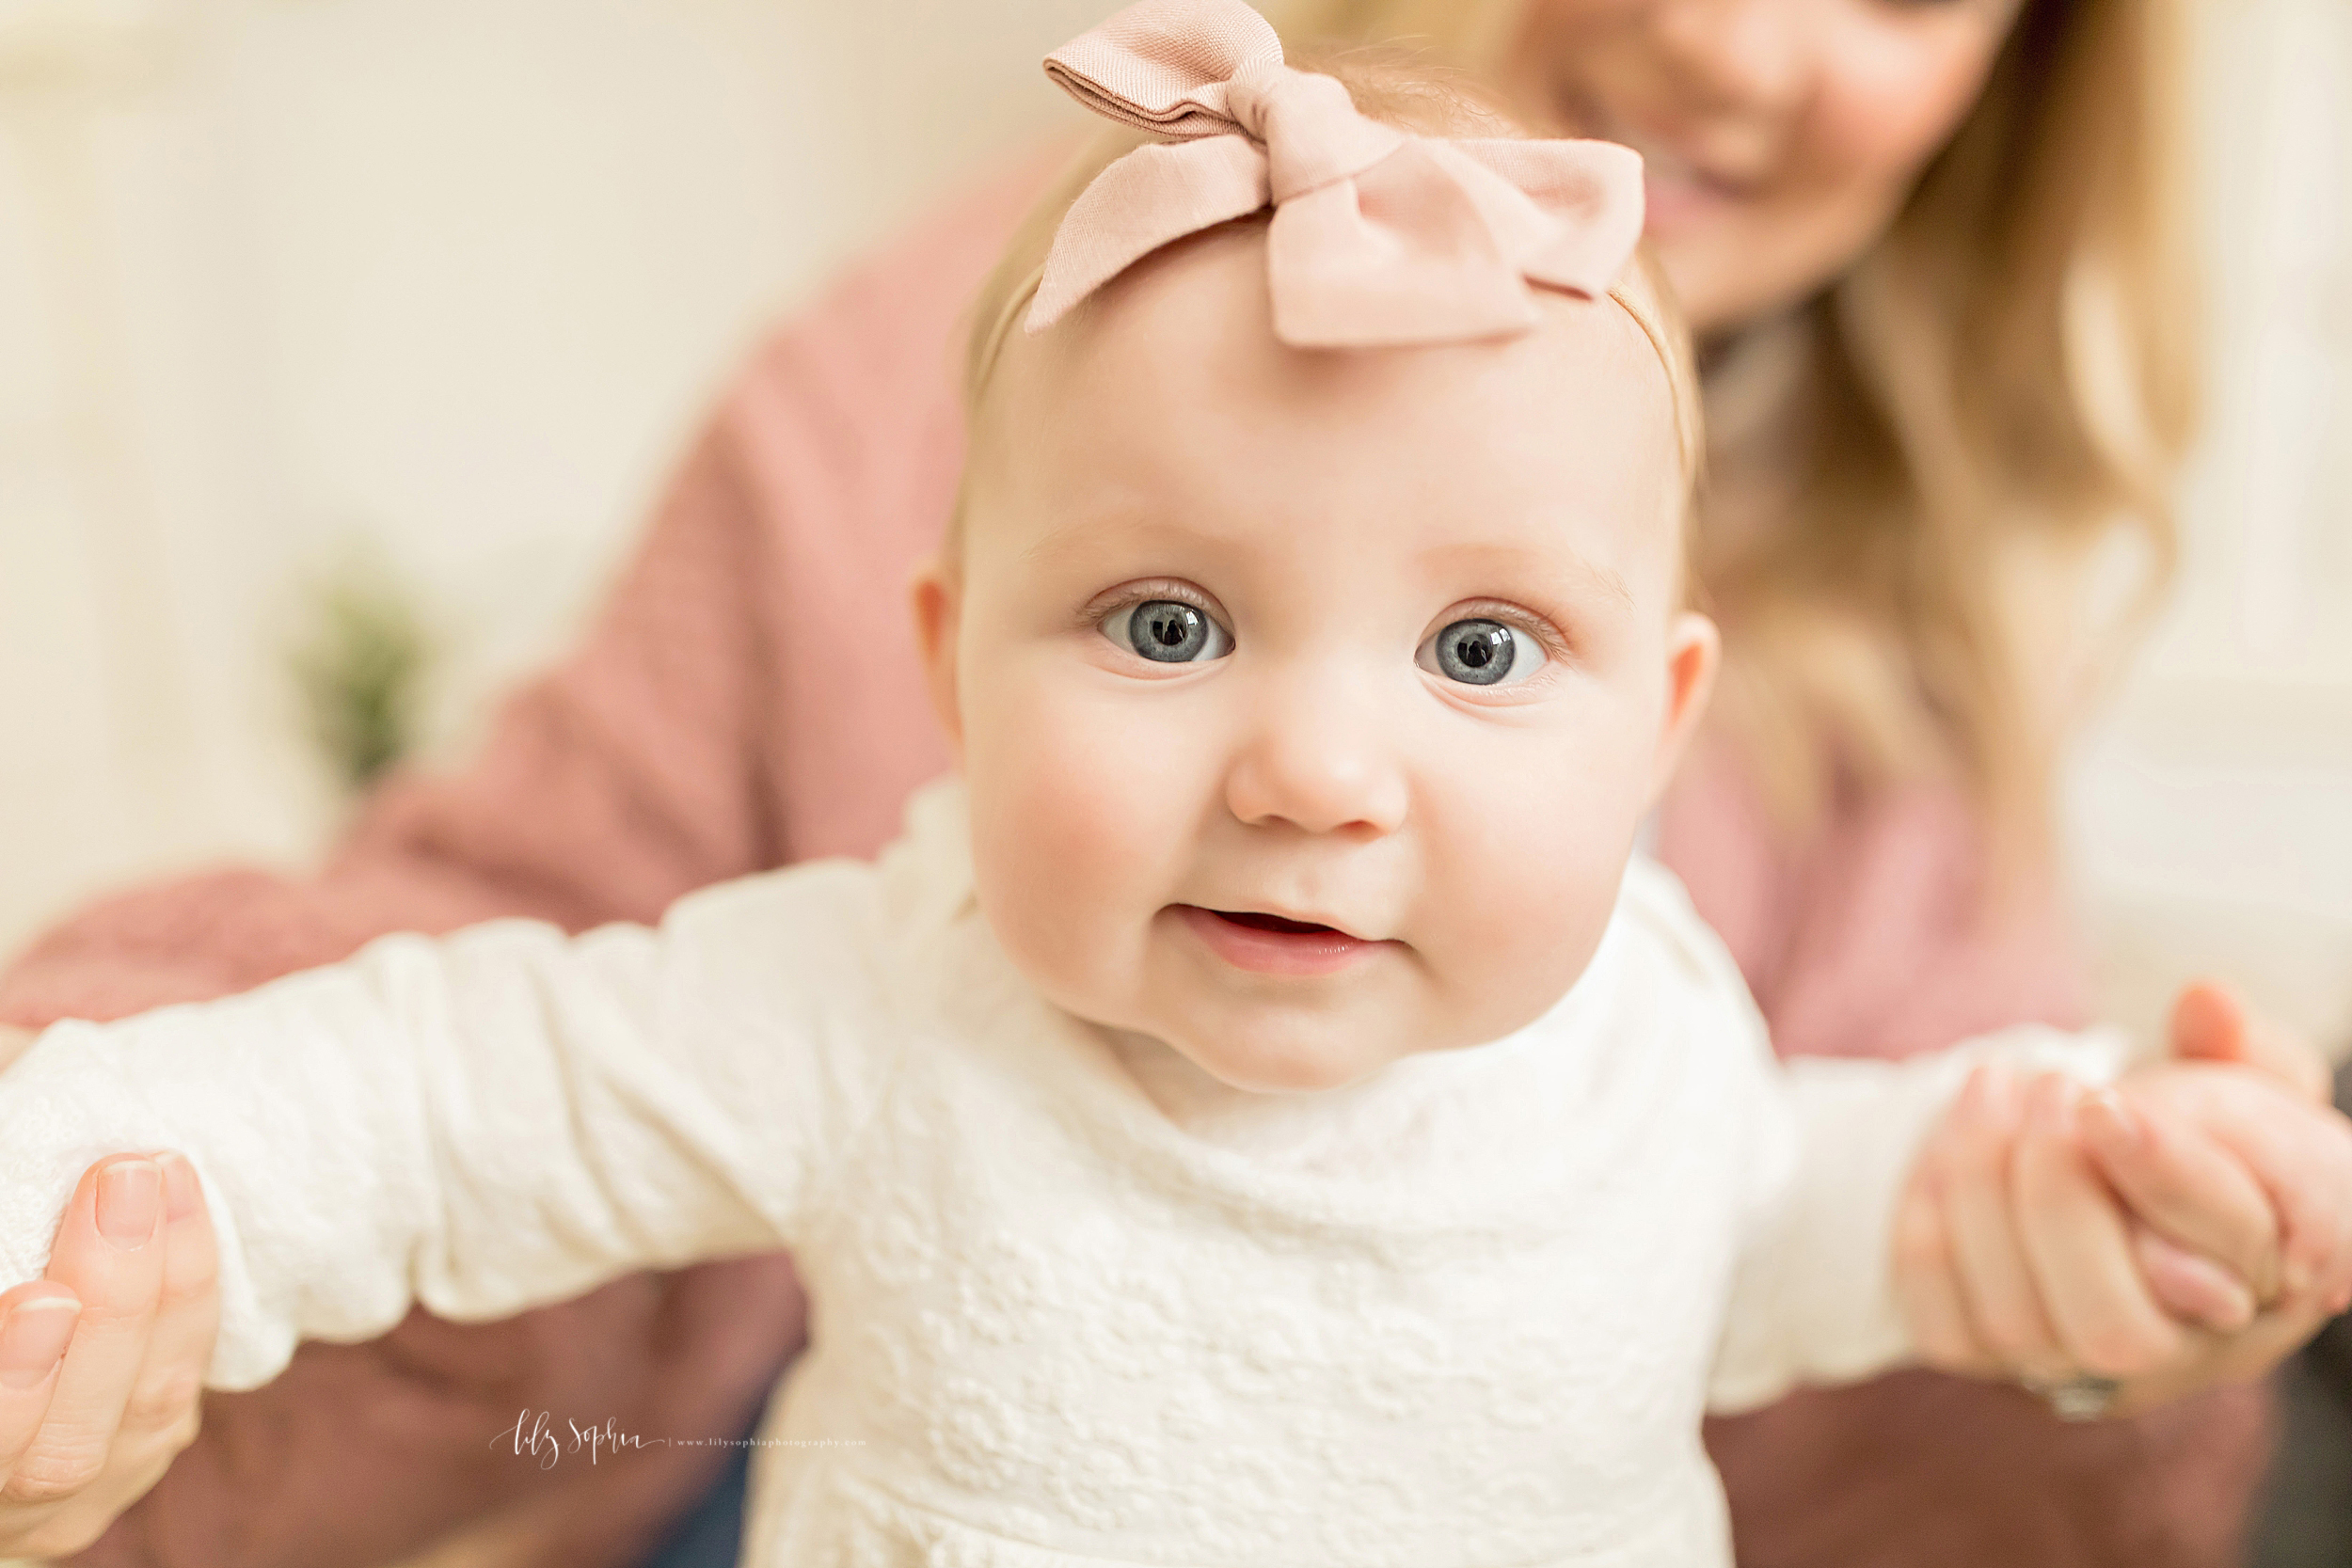 atlanta-midtown-brookhaven-ashford-dunwoody-virginia-highlands-roswell-decatur-lily-sophia-photography-in-home-six-month-milestone-family-lifestyle-session-sandy-springs_0666.jpg